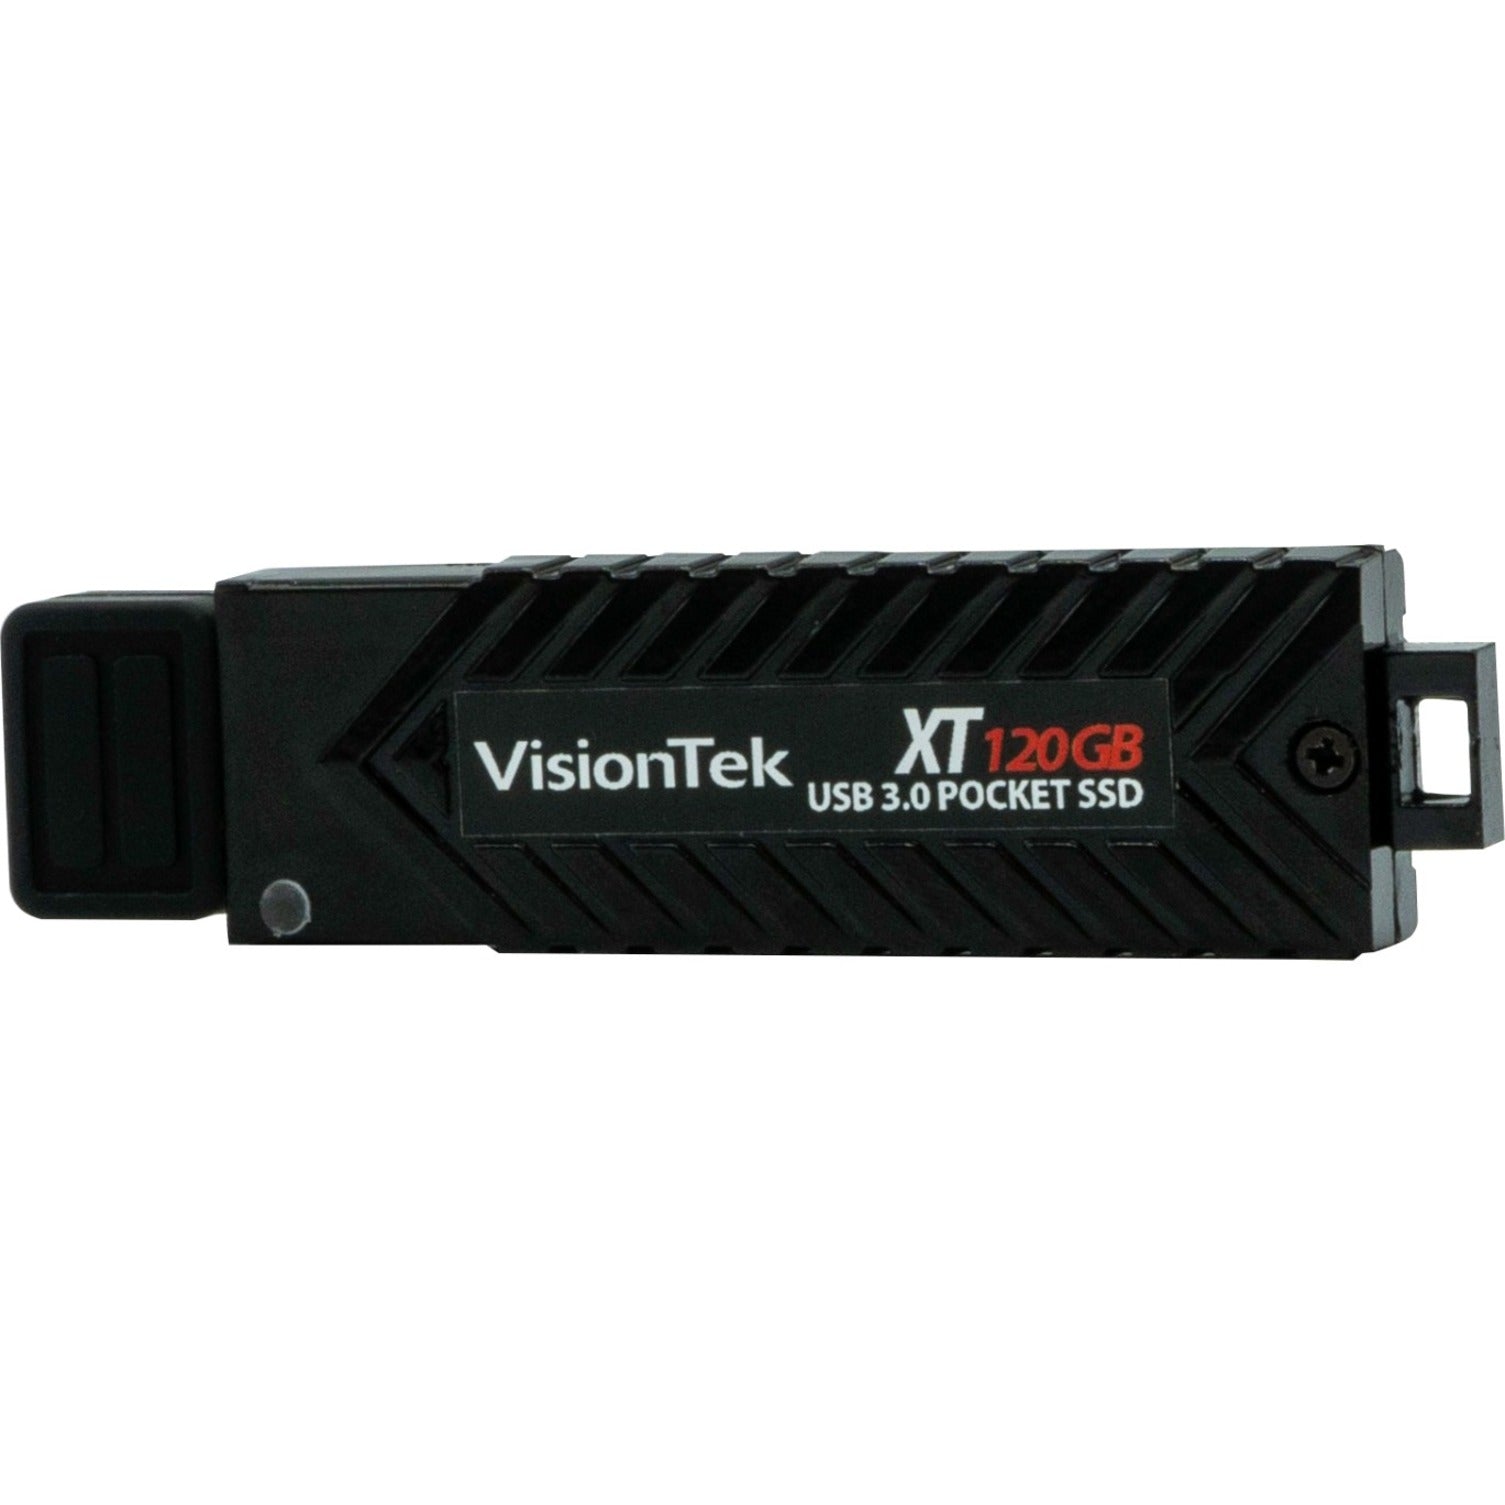 VisionTek 901238 120GB XT USB 3.0 Pocket SSD, Fast and Portable Solid State Drive